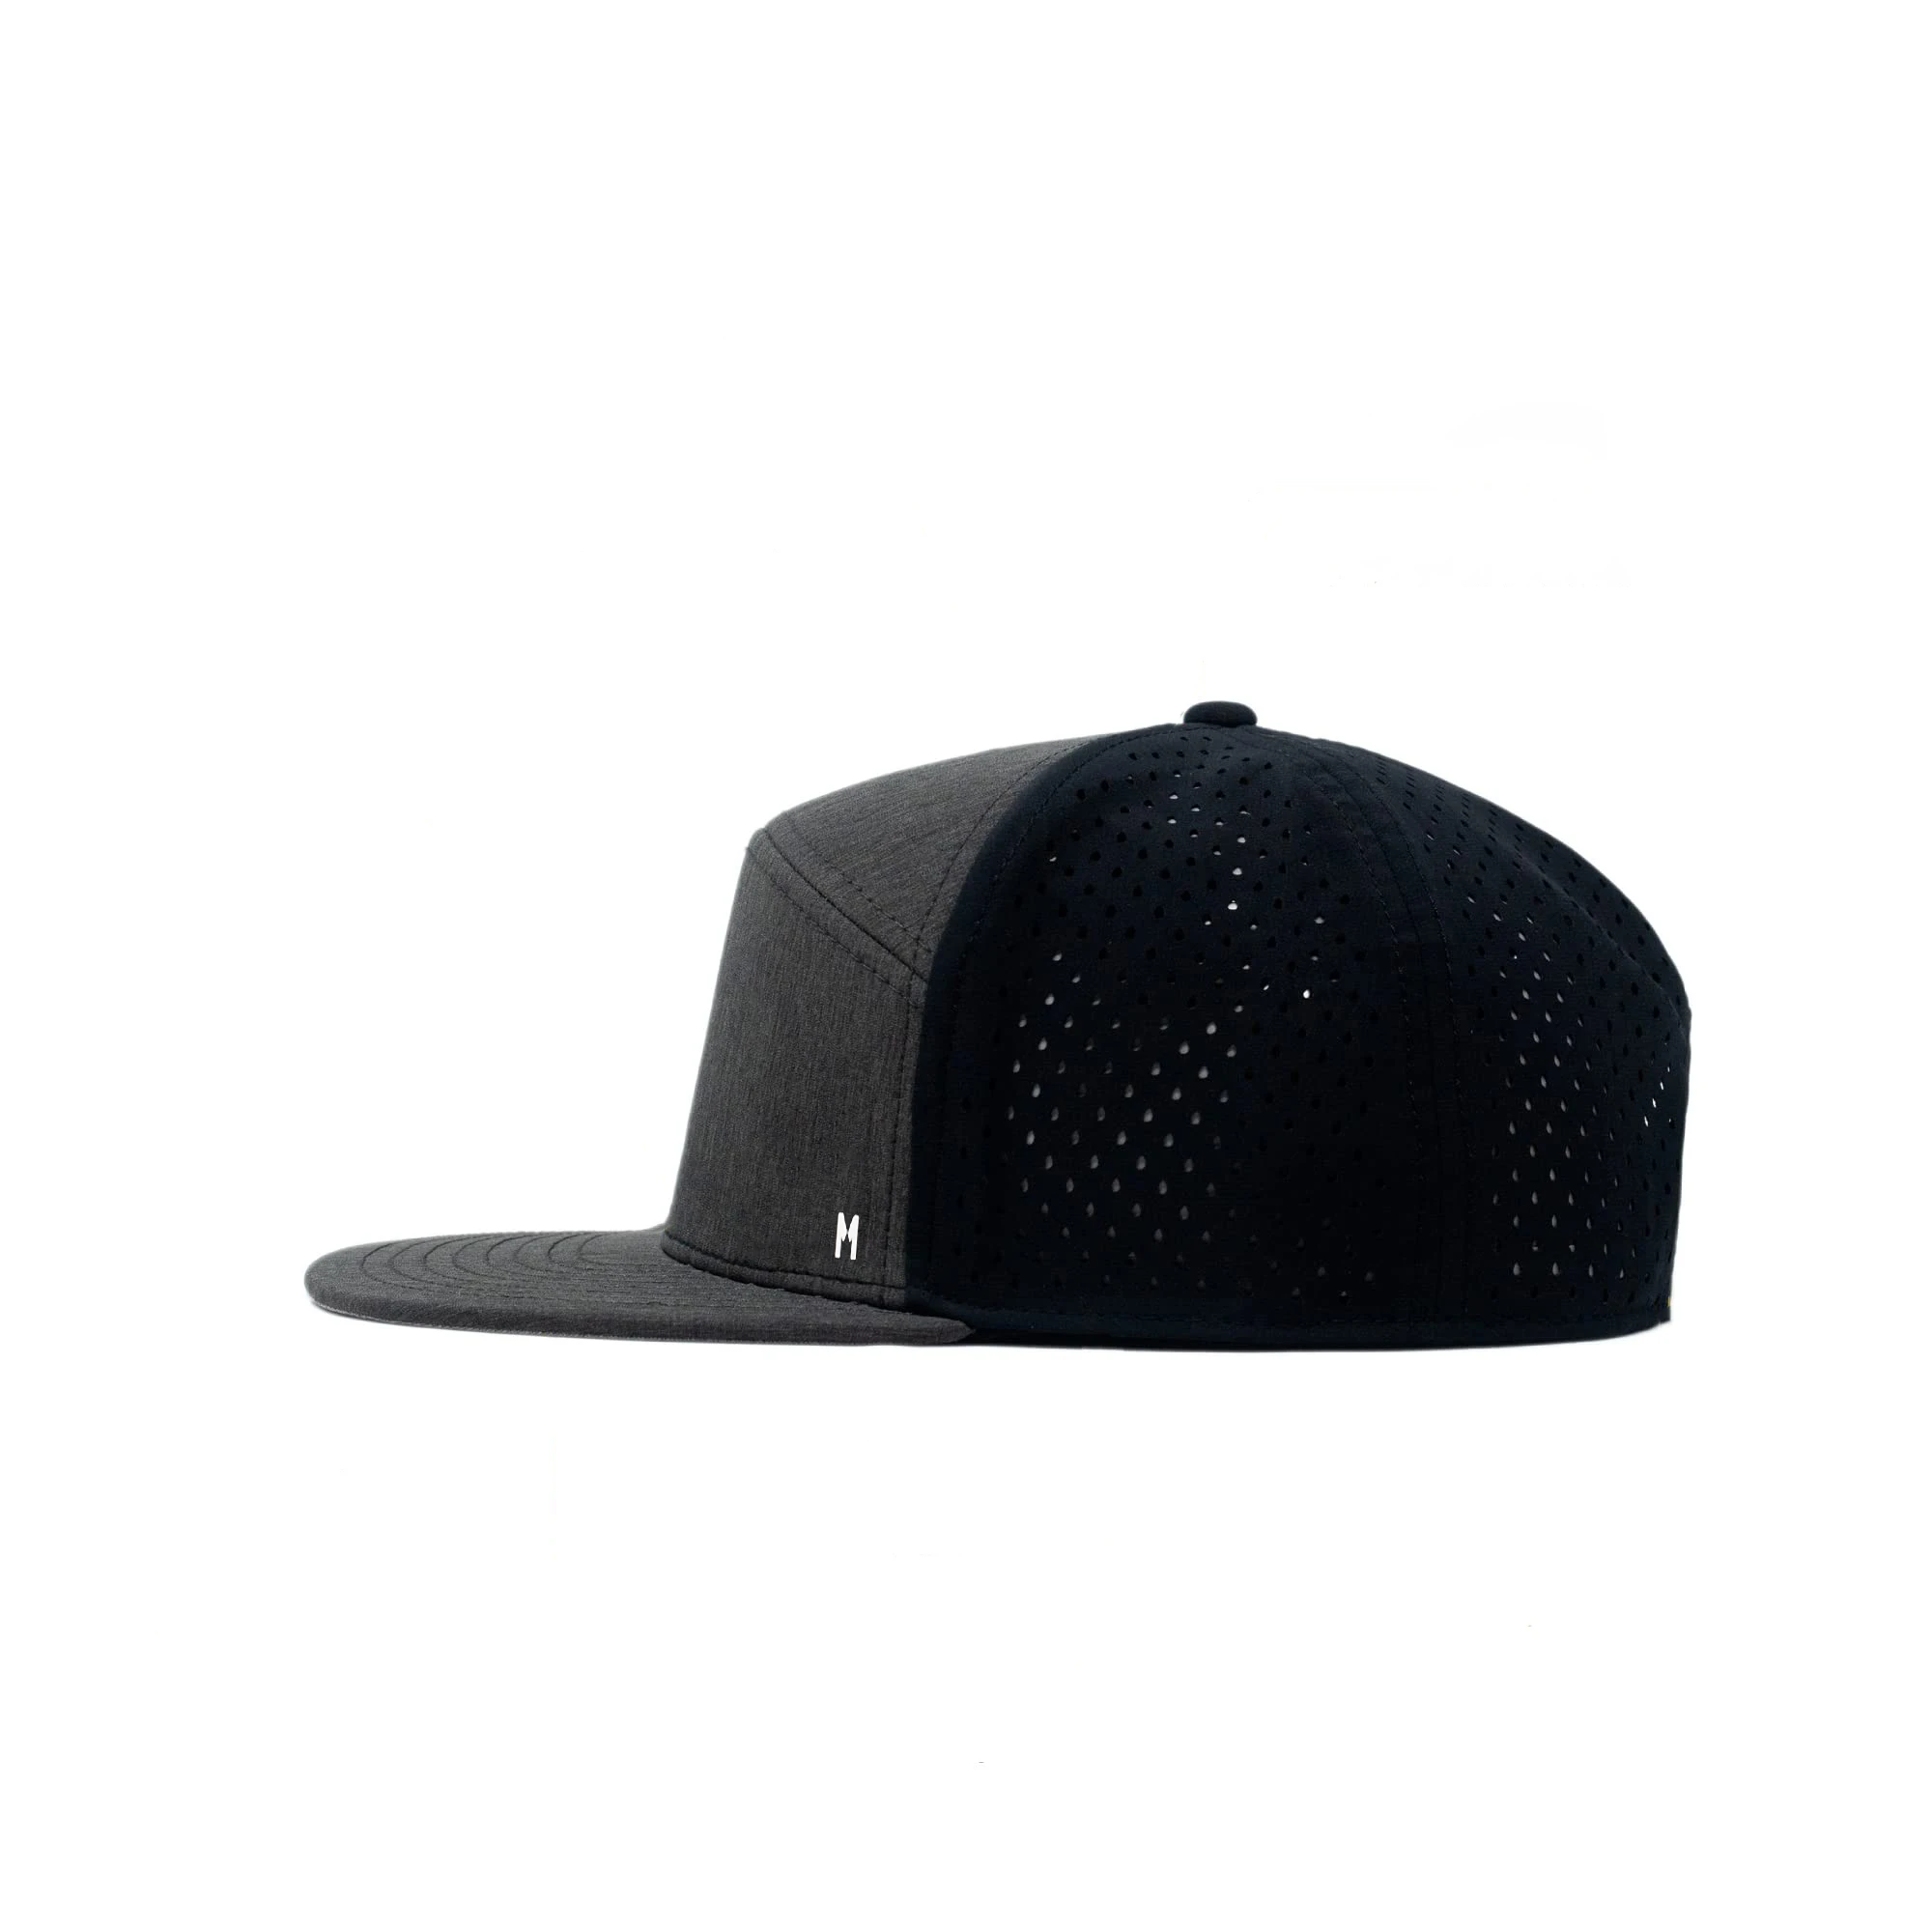 Custom 6 Panel Two Tone Fitted Flat Brim Cap Laser Cut Hole Perforated ...